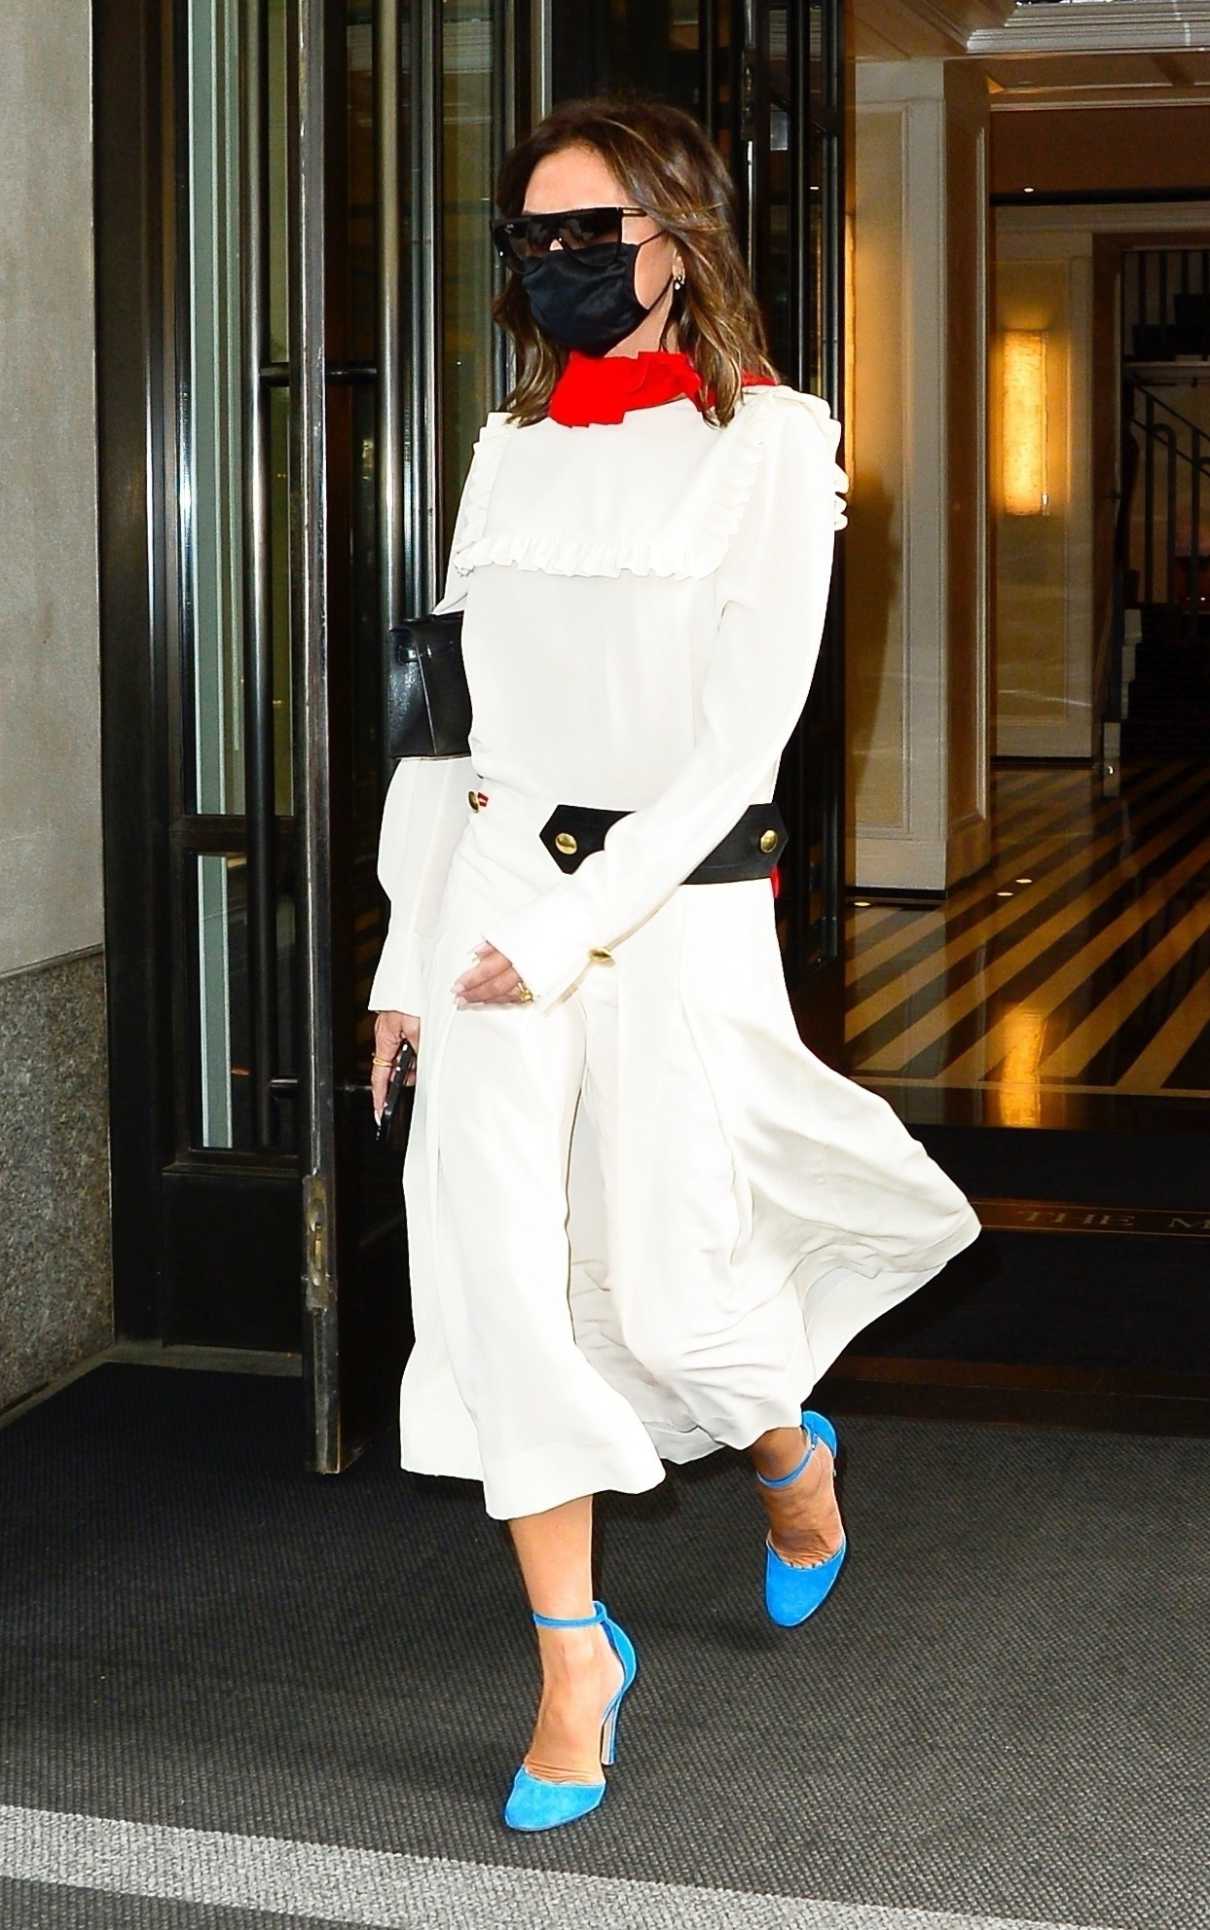 Victoria Beckham In A White Dress Exits Her Hotel In New York 05 25 2021 3 Lacelebs Co